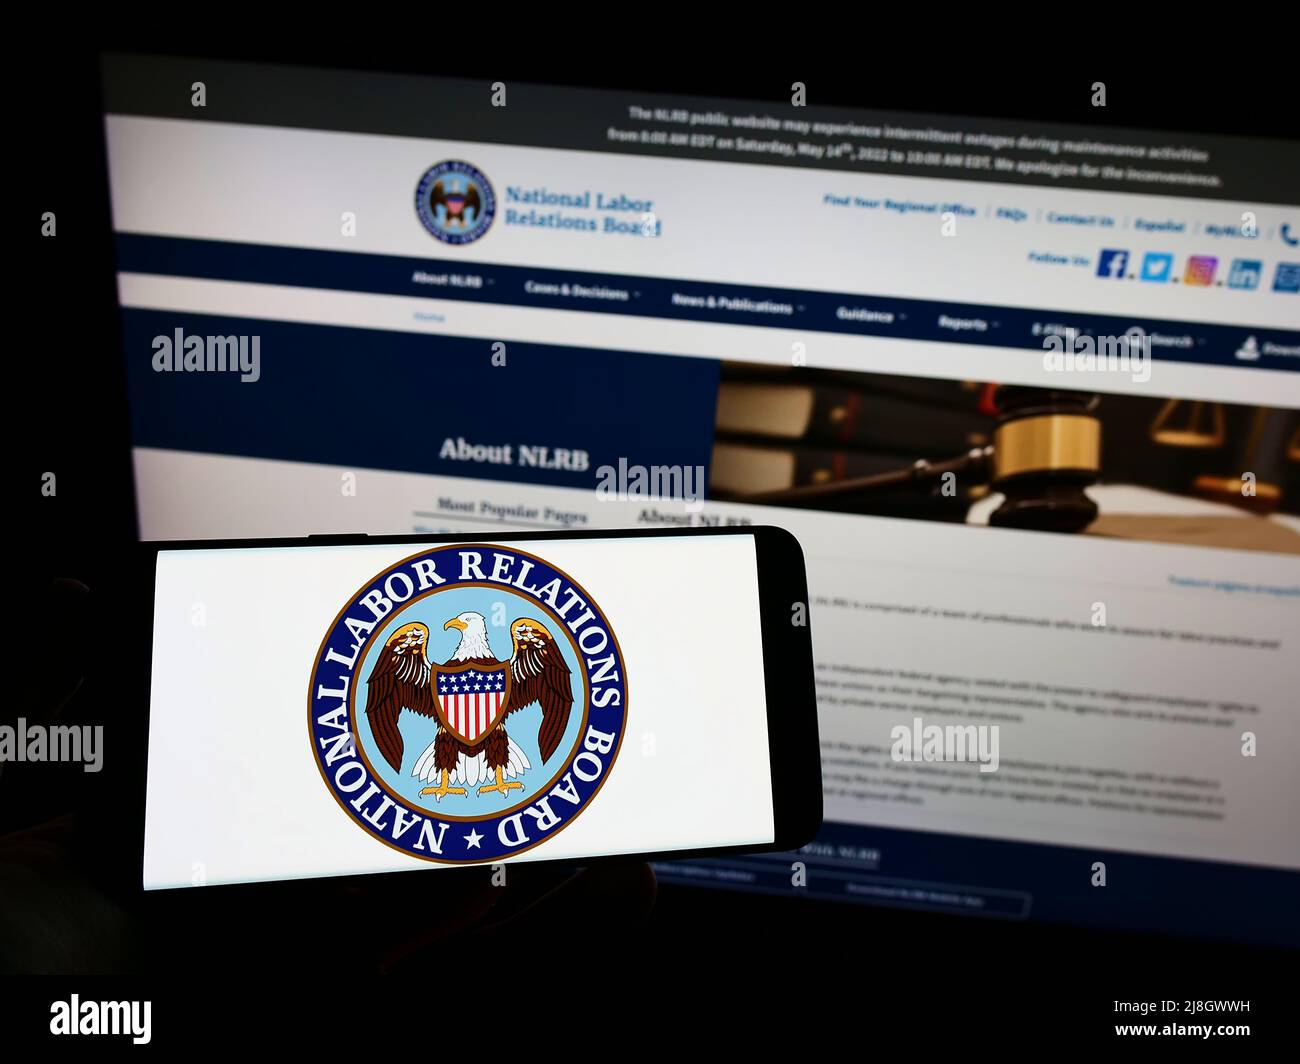 Person holding mobile phone with logo of American National Labor Relations Board (NLRB) on screen in front of web page. Focus on phone display. Stock Photo